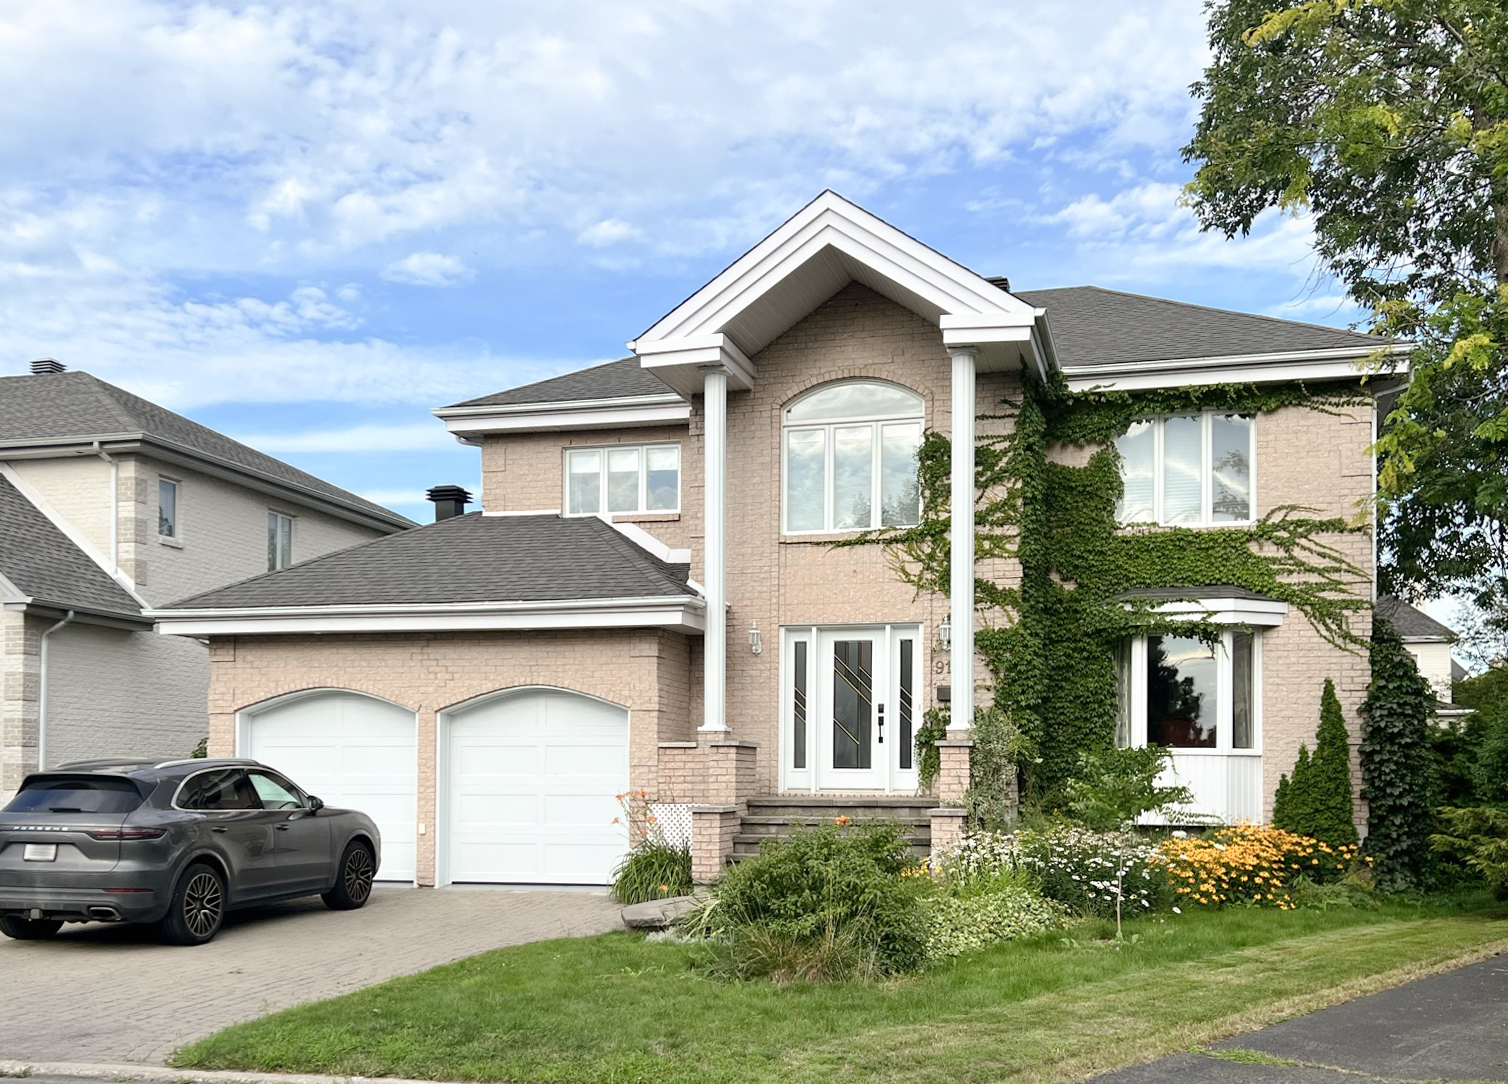 Two or more storey for sale, Brossard